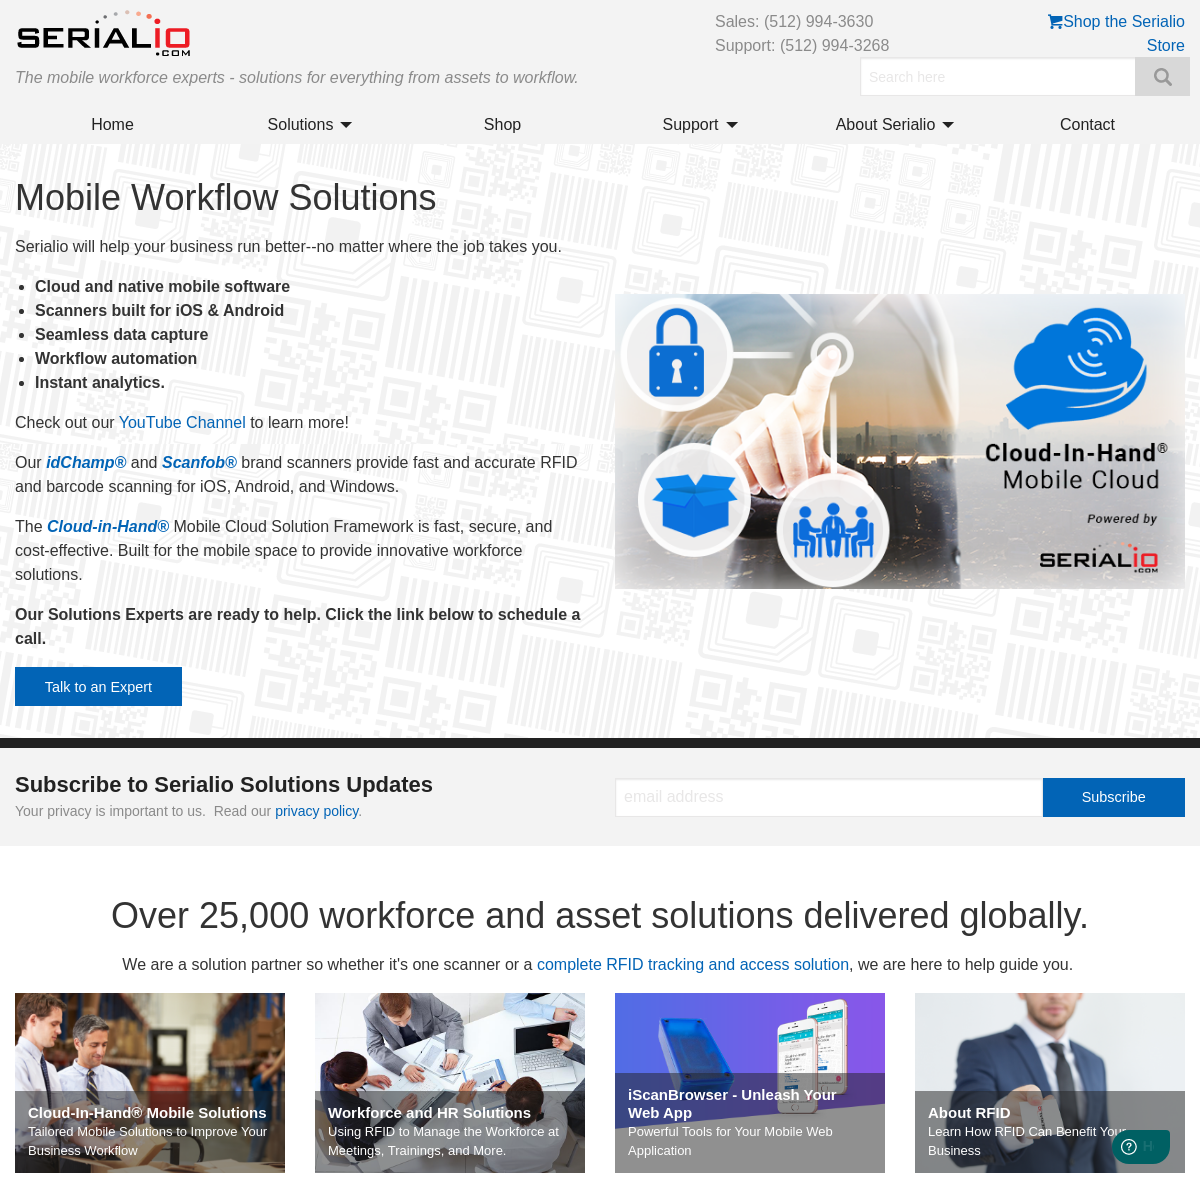 A complete backup of serialio.com